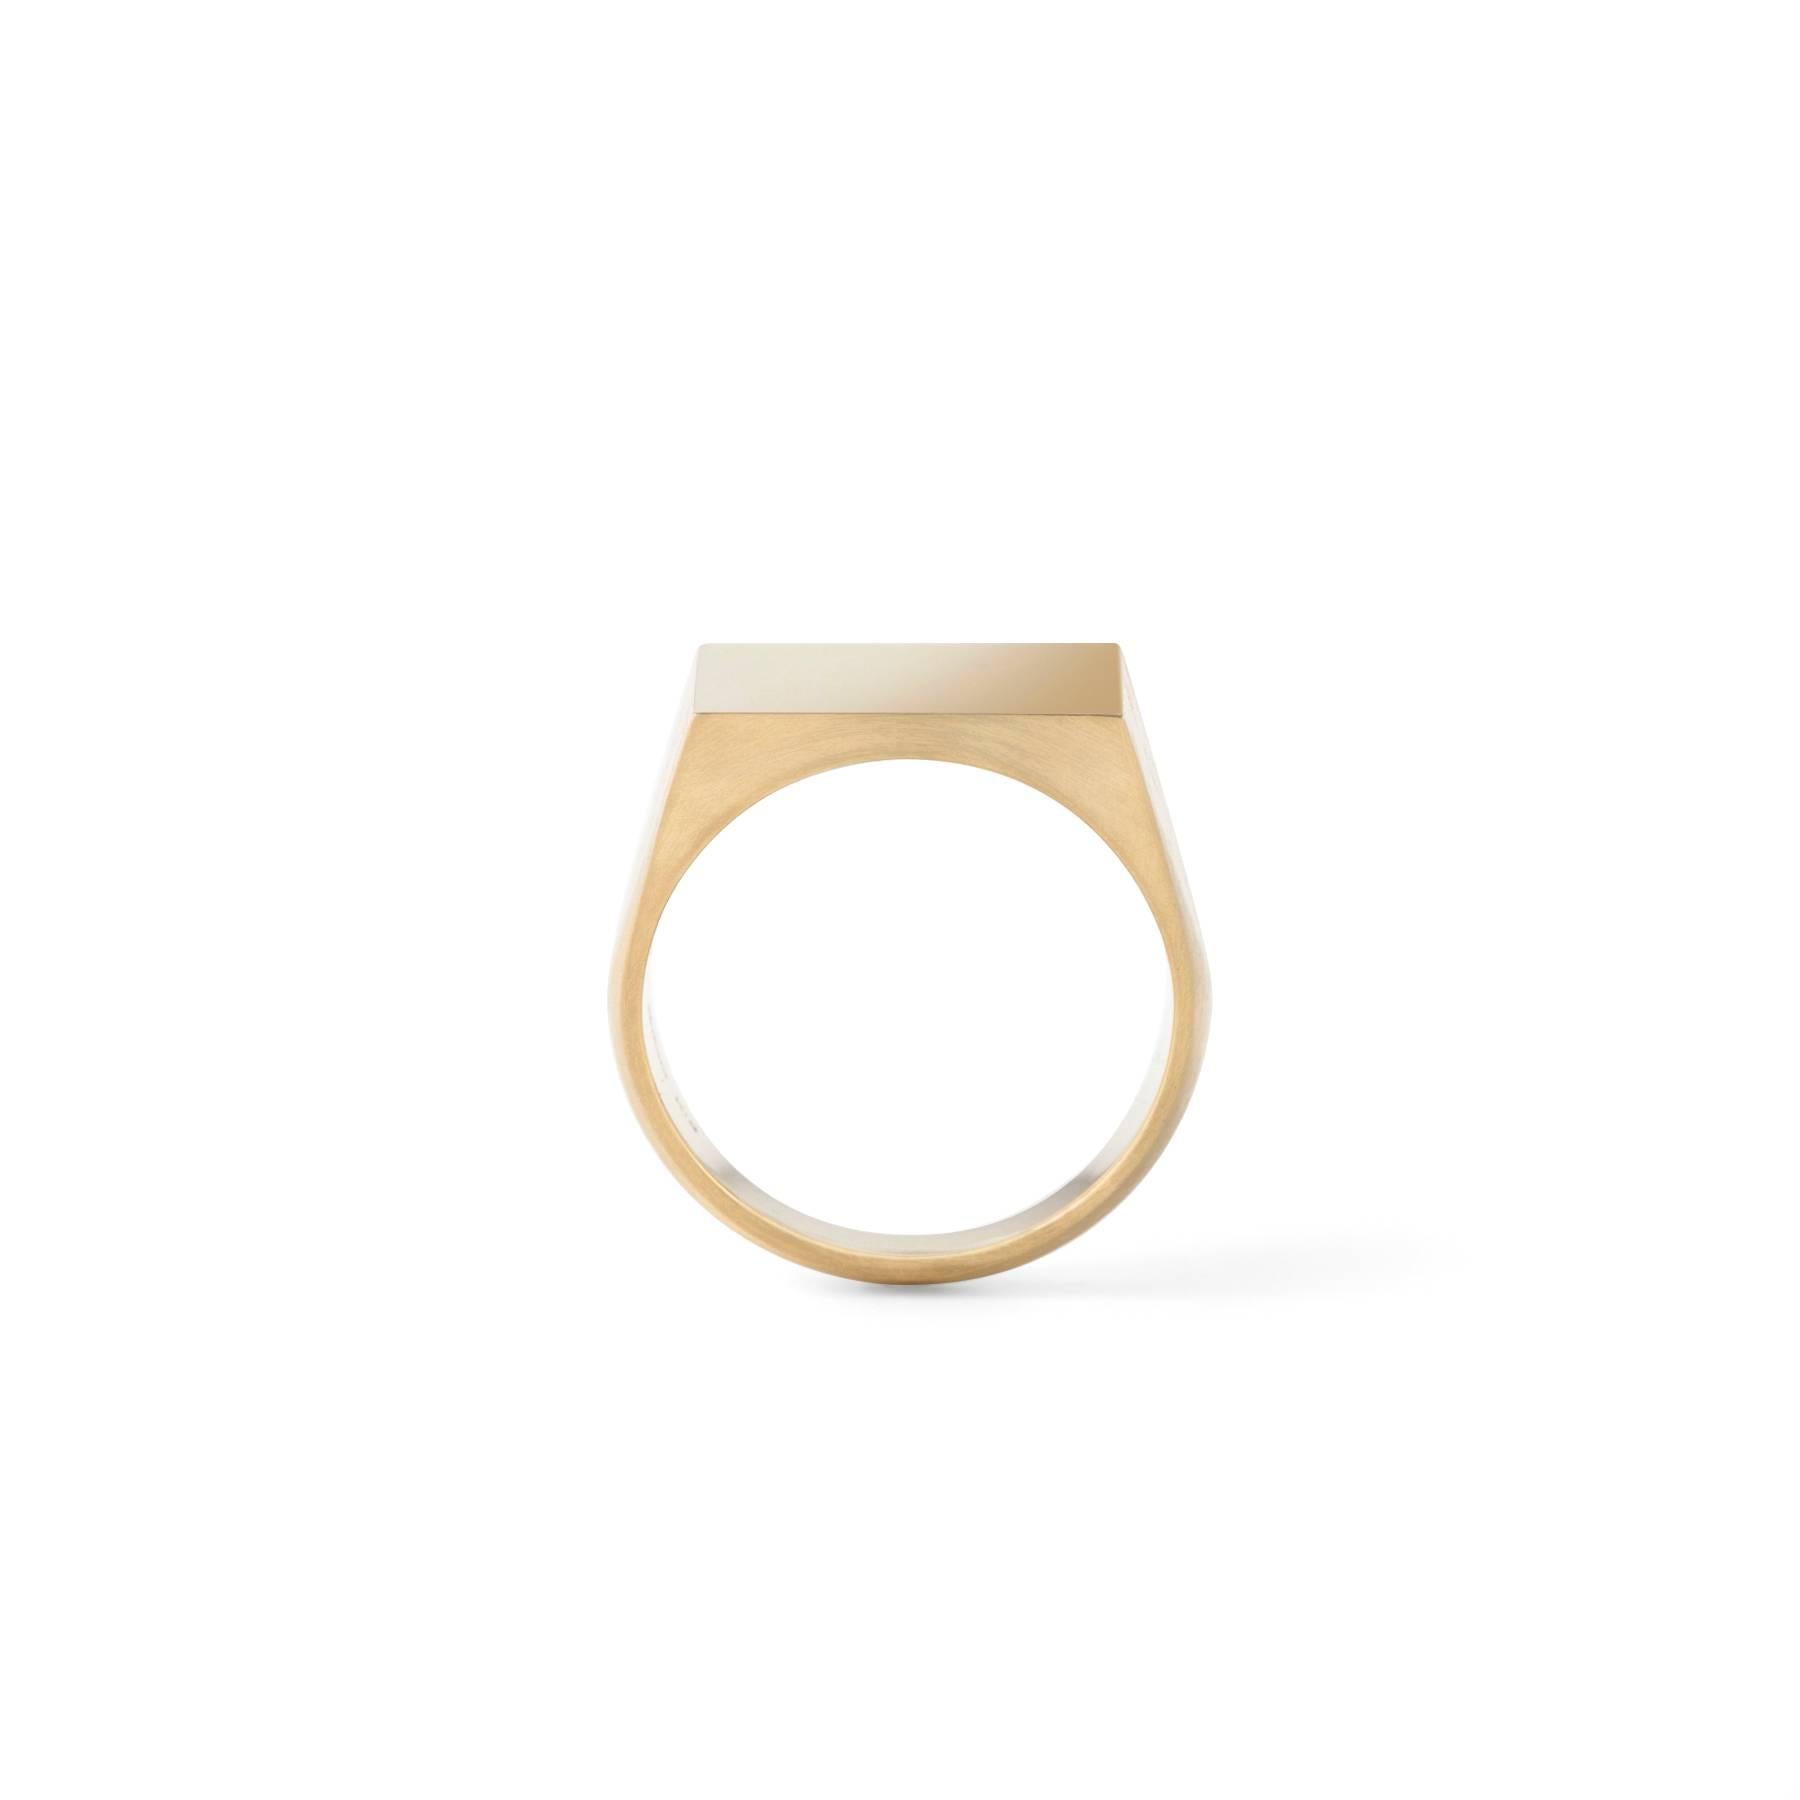 A classic square signet ring made of 18 karat yellow gold. The signet surface and inside the ring band is polished in contrast to the surface of the ring band which is matte.

18 Karat Yellow Gold Square Signet Ring
Japan Size #21～#28
Signet top